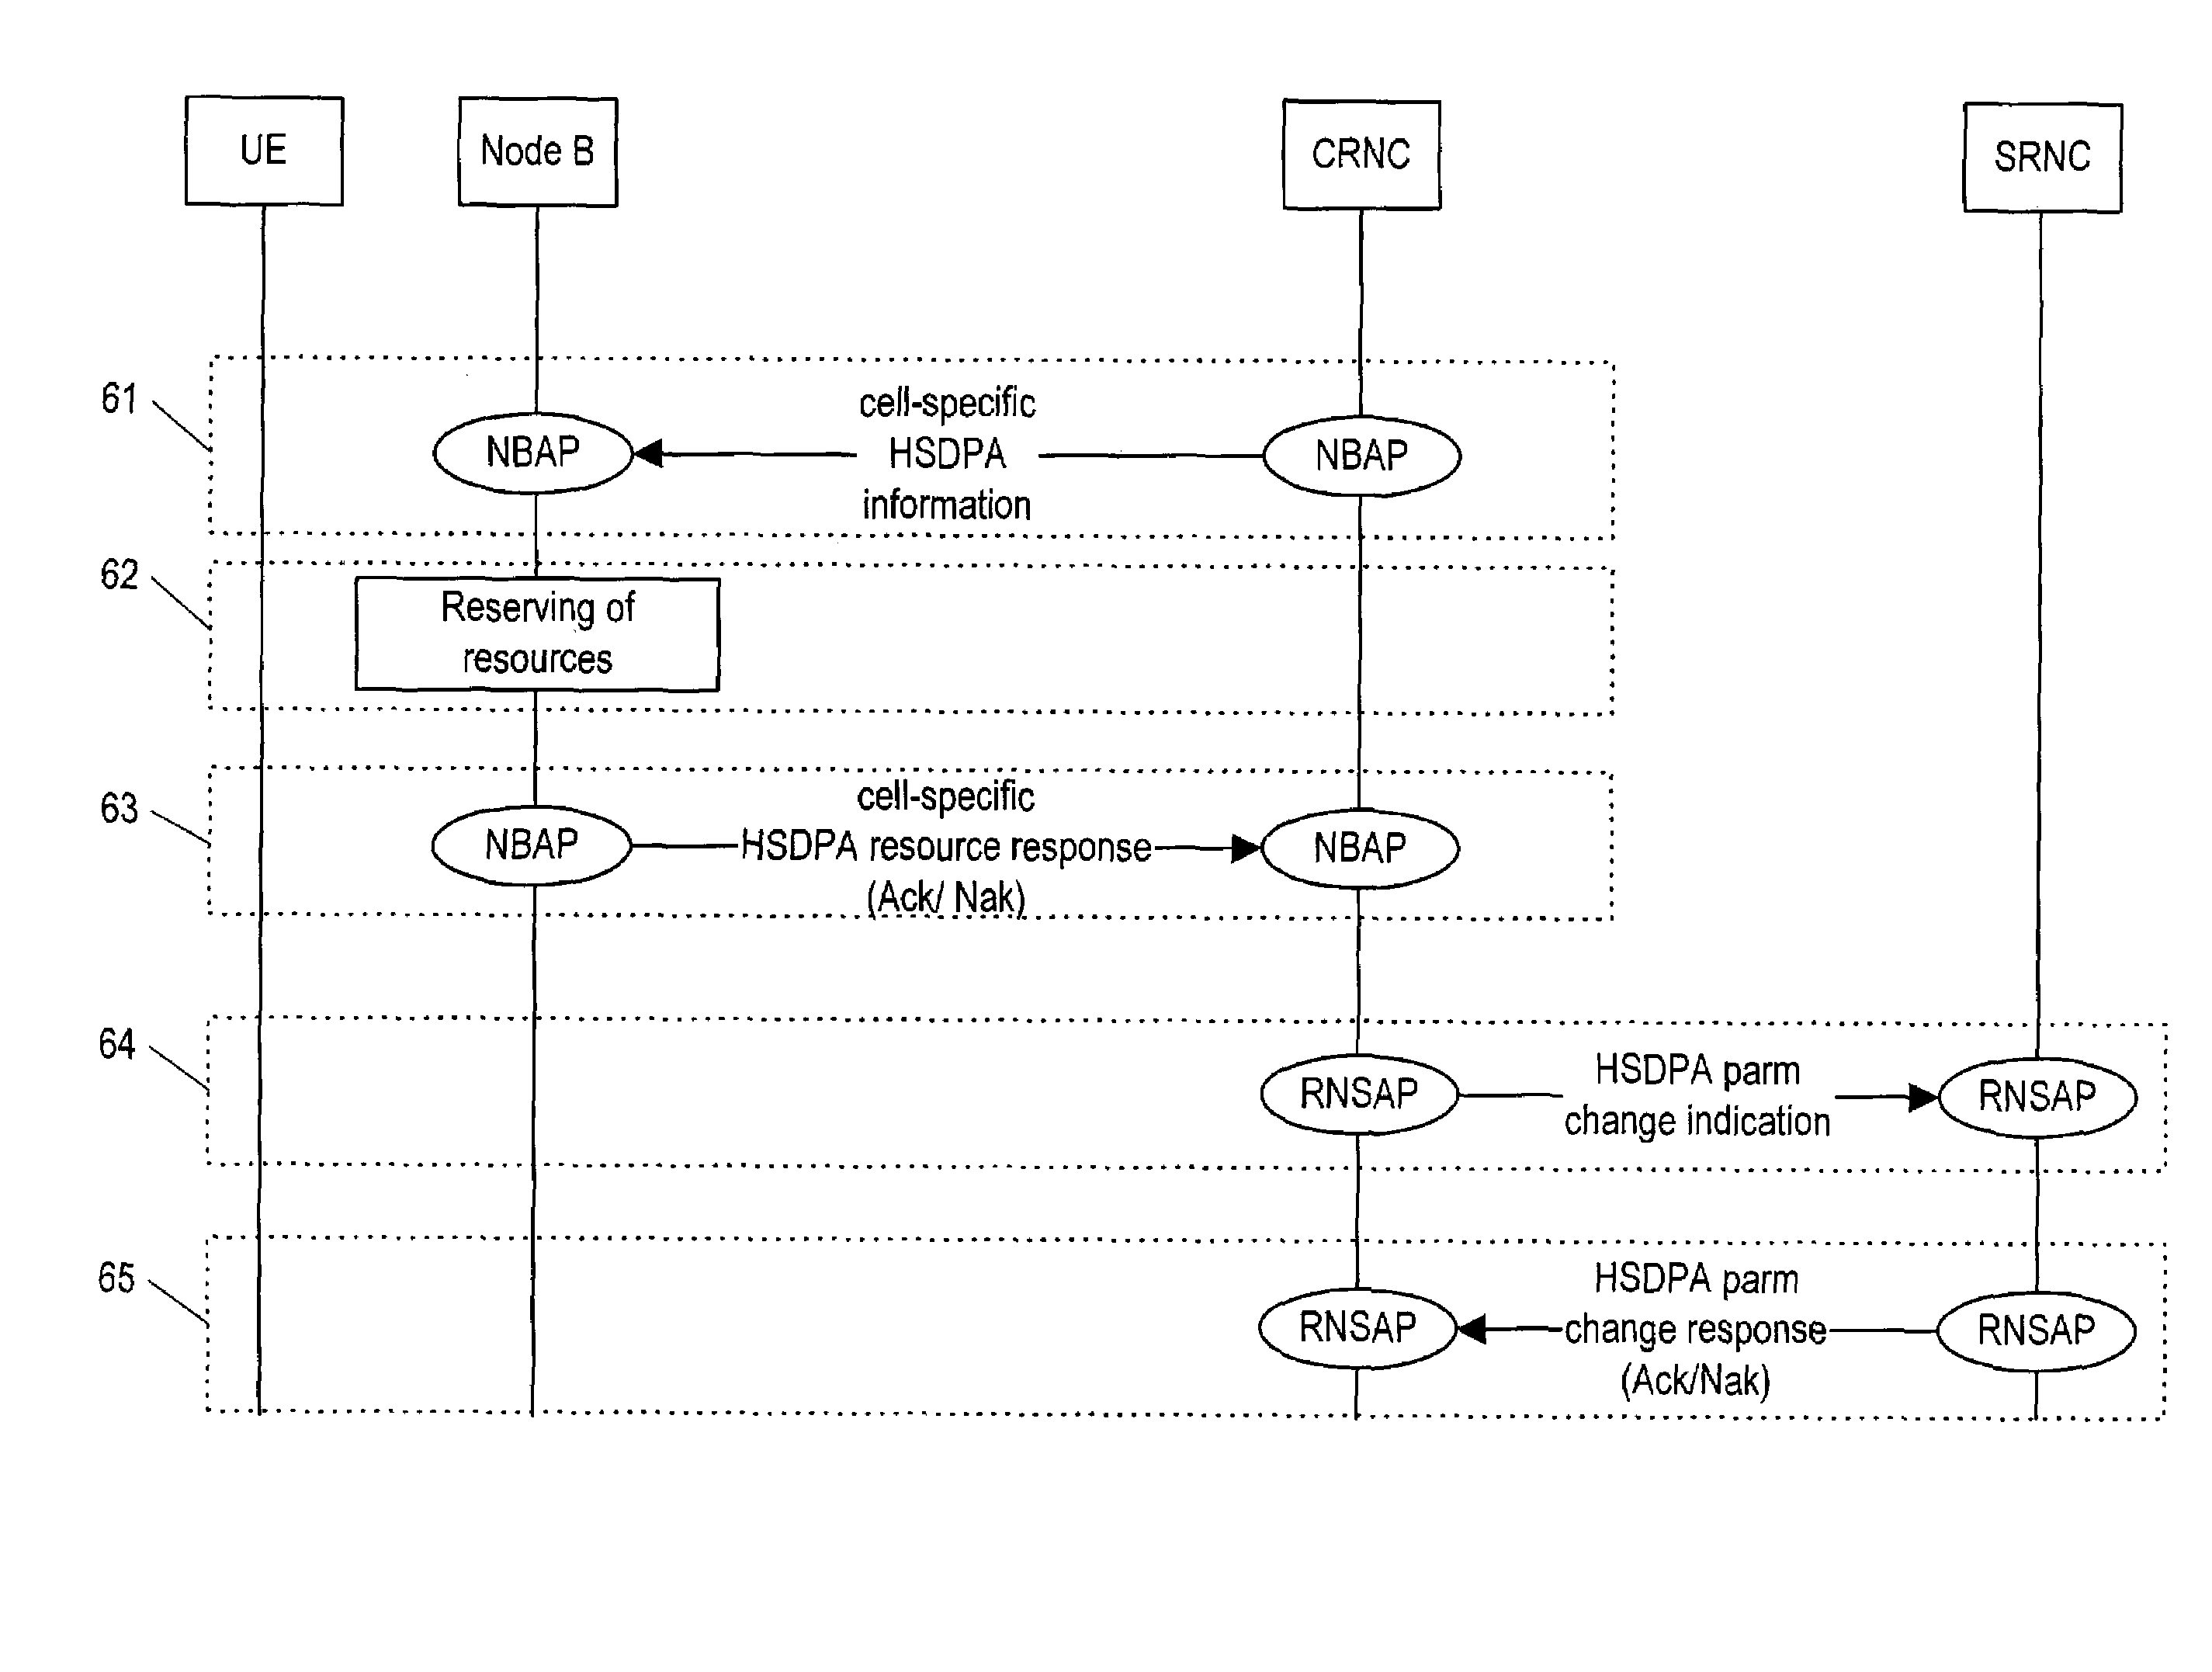 Method and apparatus for cell-specific HSDPA parameter configuration and reconfiguration